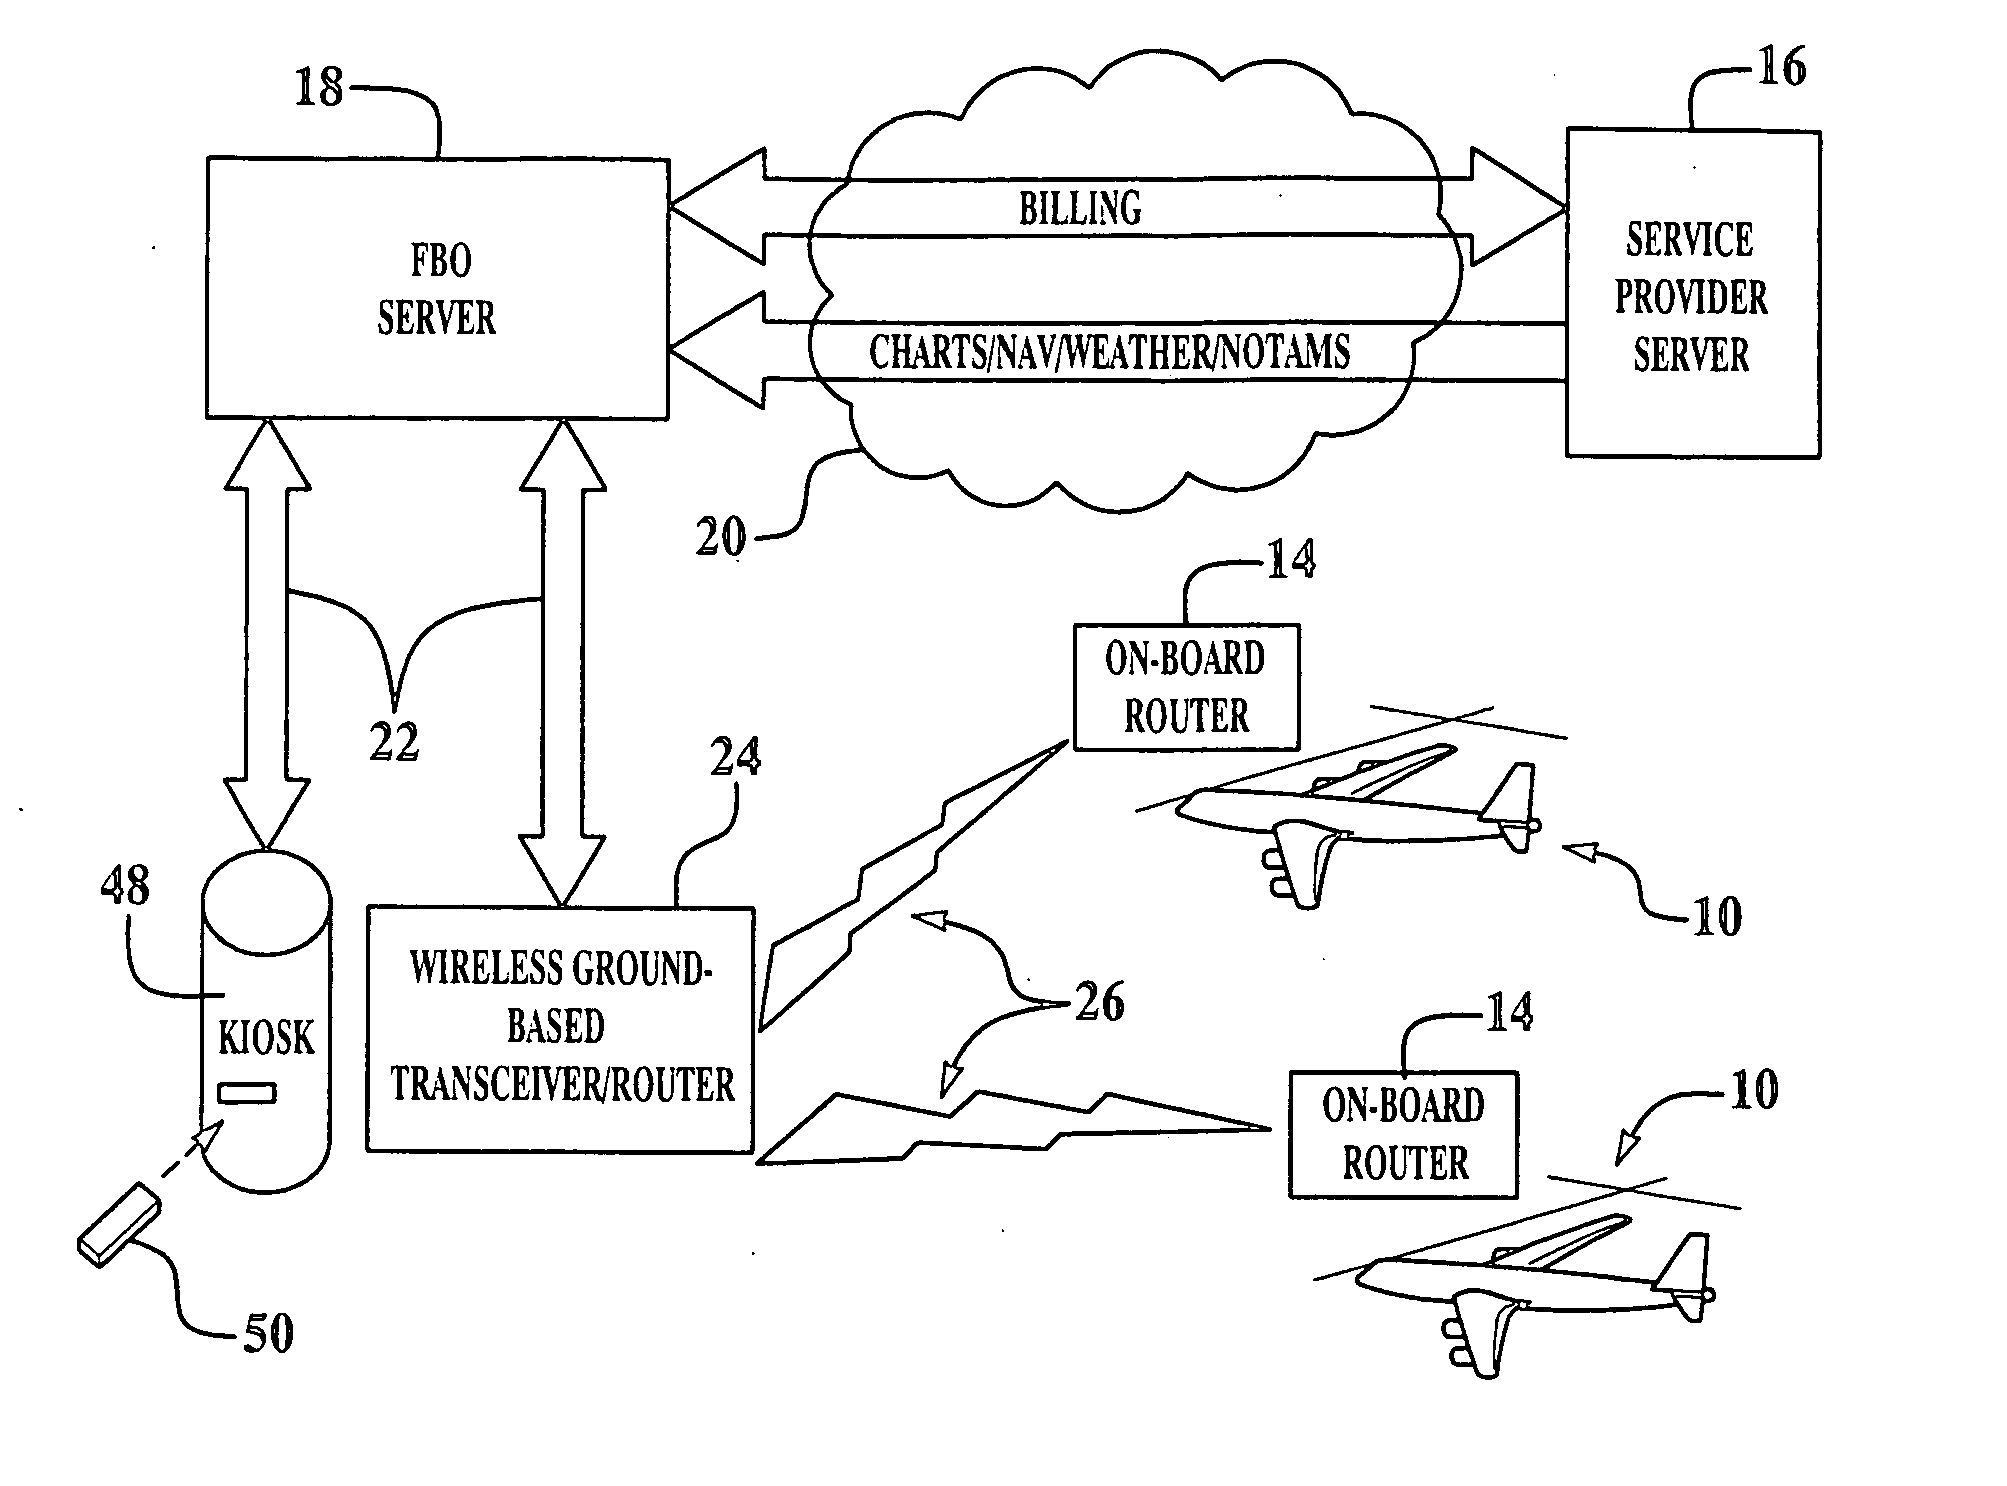 Automated delivery of flight data to aircraft cockpit devices